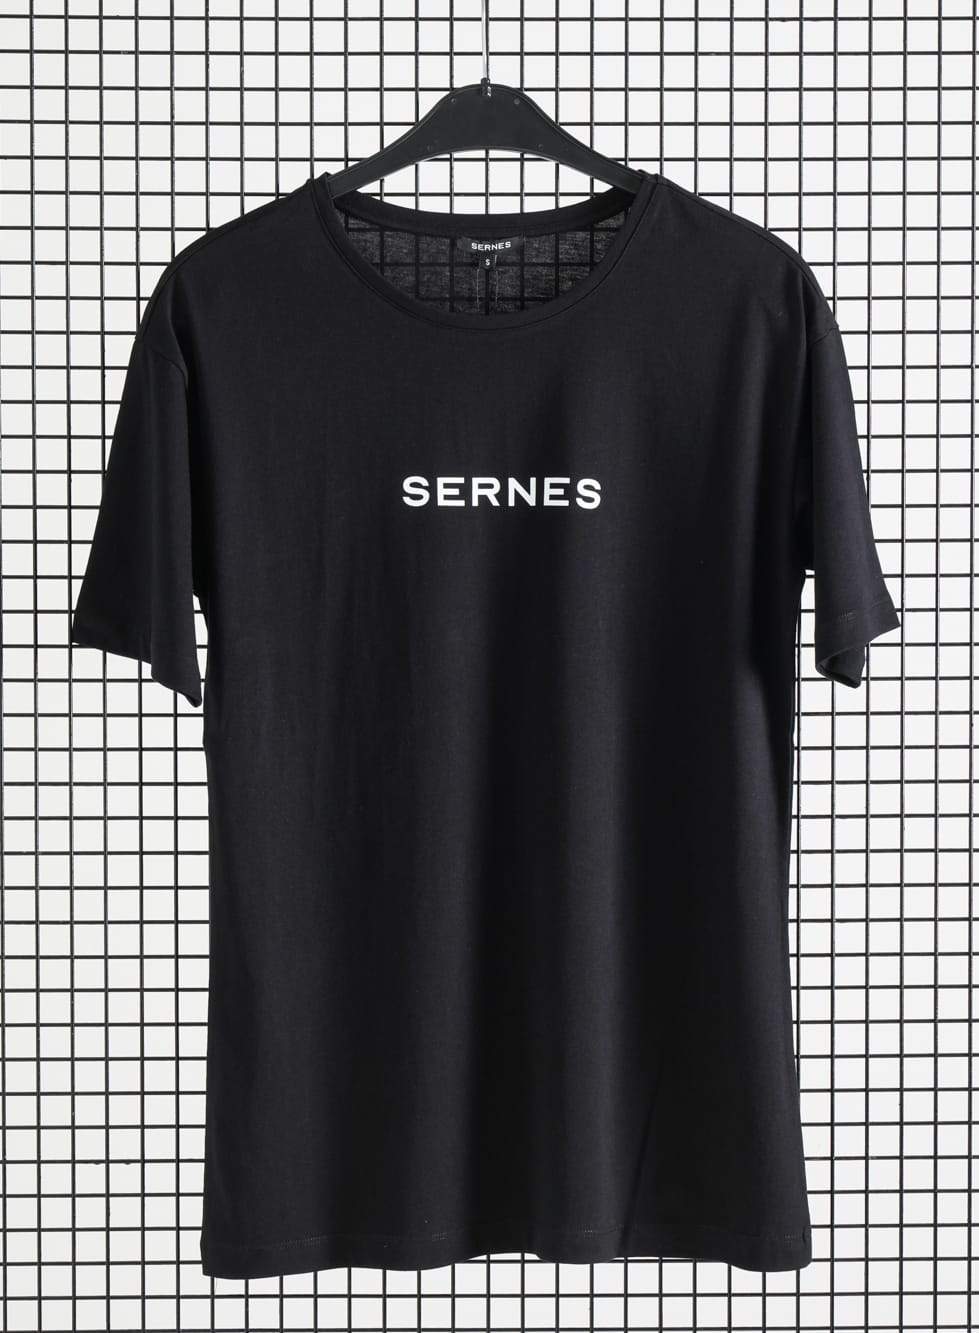 A black THE ORIGINAL T-SHIRT with the word senes on it.